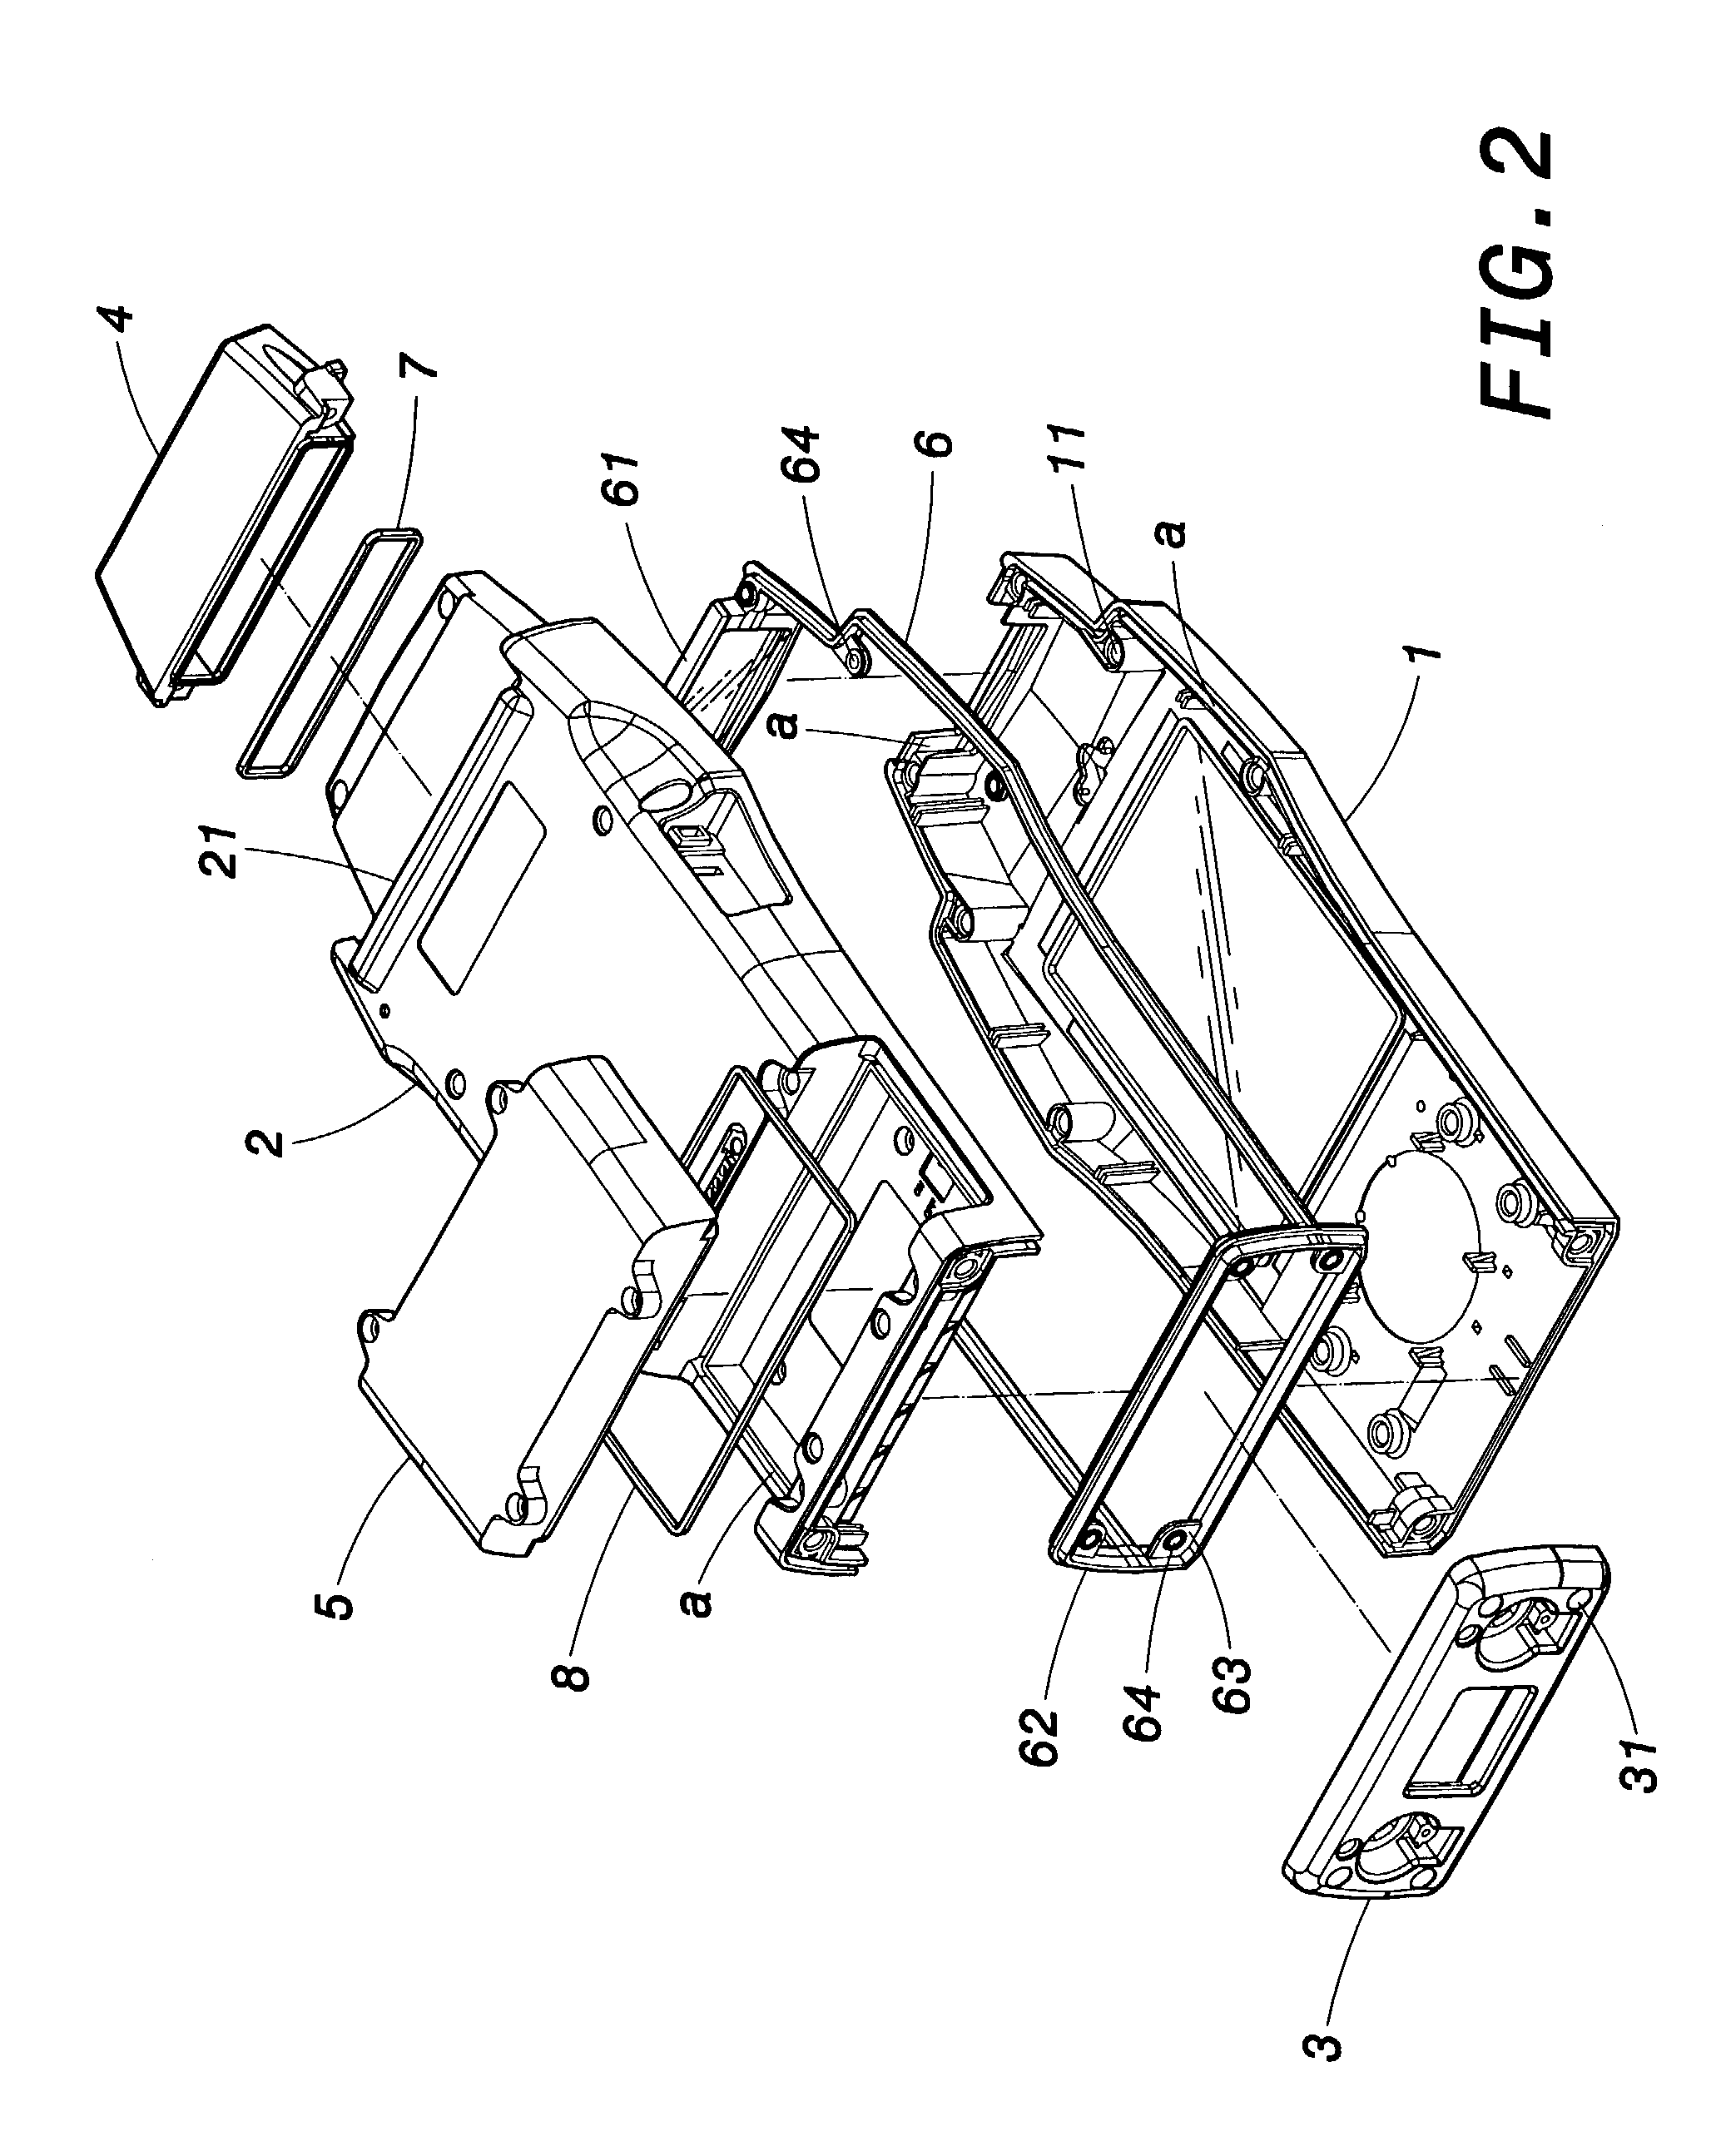 Waterproof structure of handheld electronic device